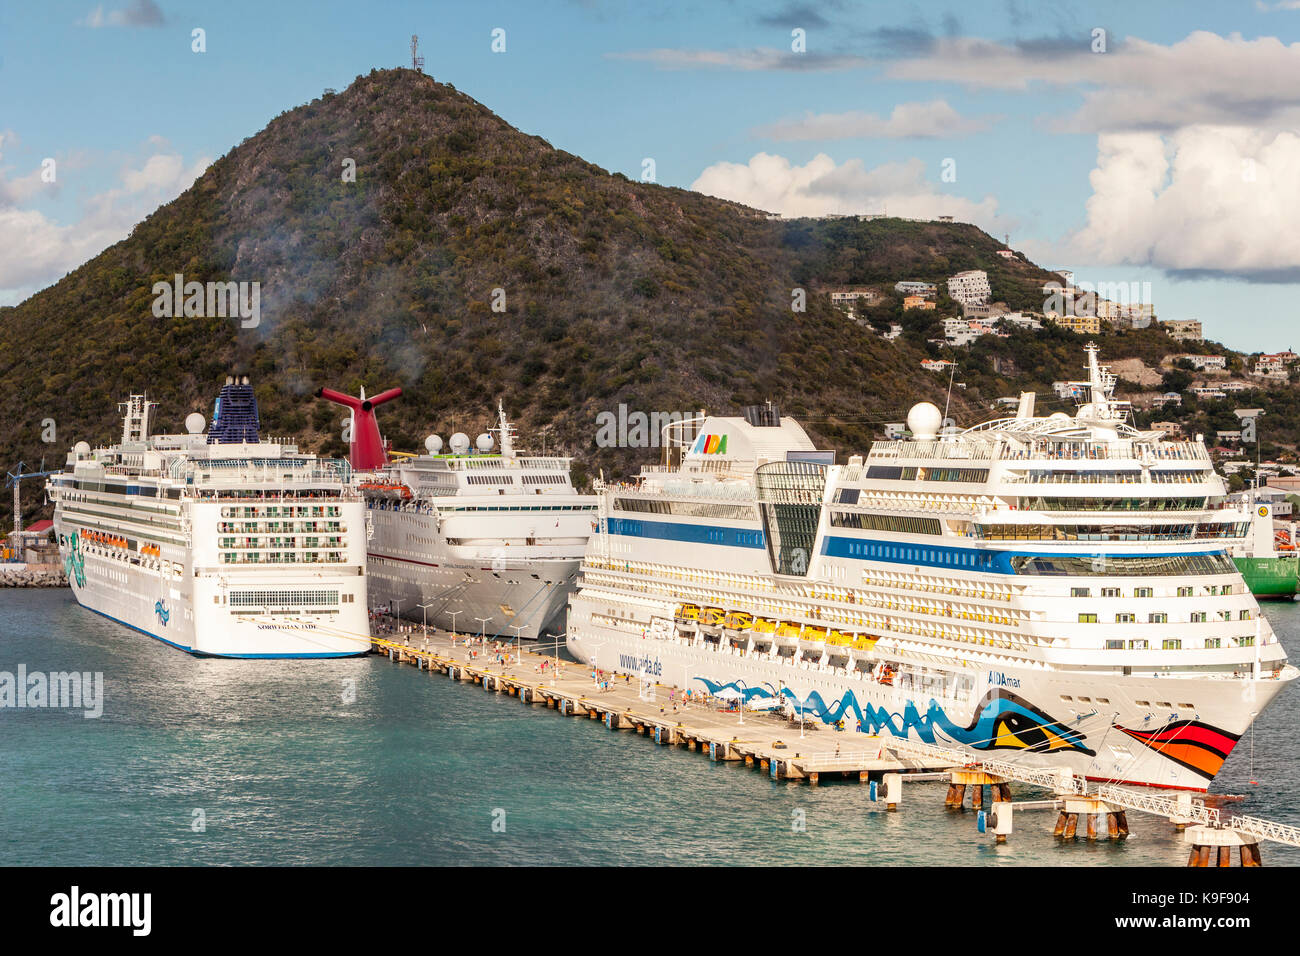 Philipsburg, Sint Maarten.  Three Cruise Ships Tied up at the Pier: Norwegian Jade, Carnival Fascination, Aida Mar.   FOR EDITORIAL USE ONLY. Stock Photo